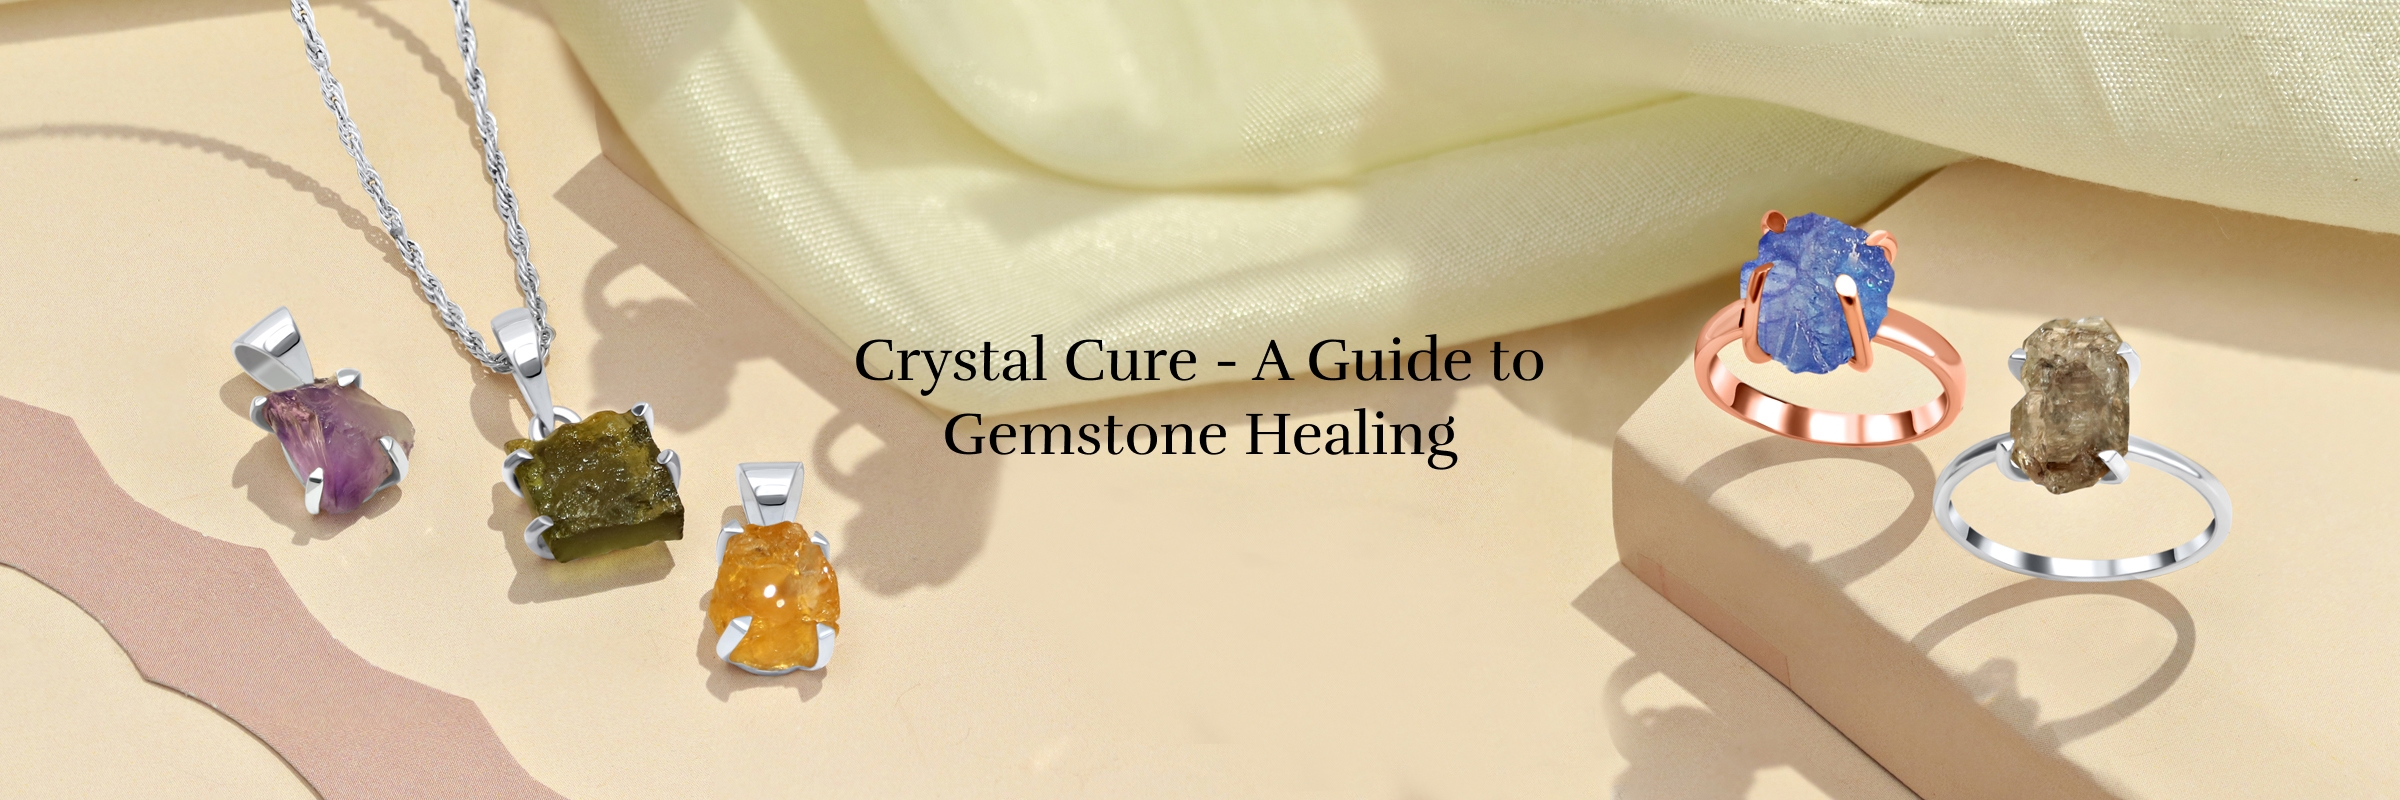 How to Use these Healing gemstones